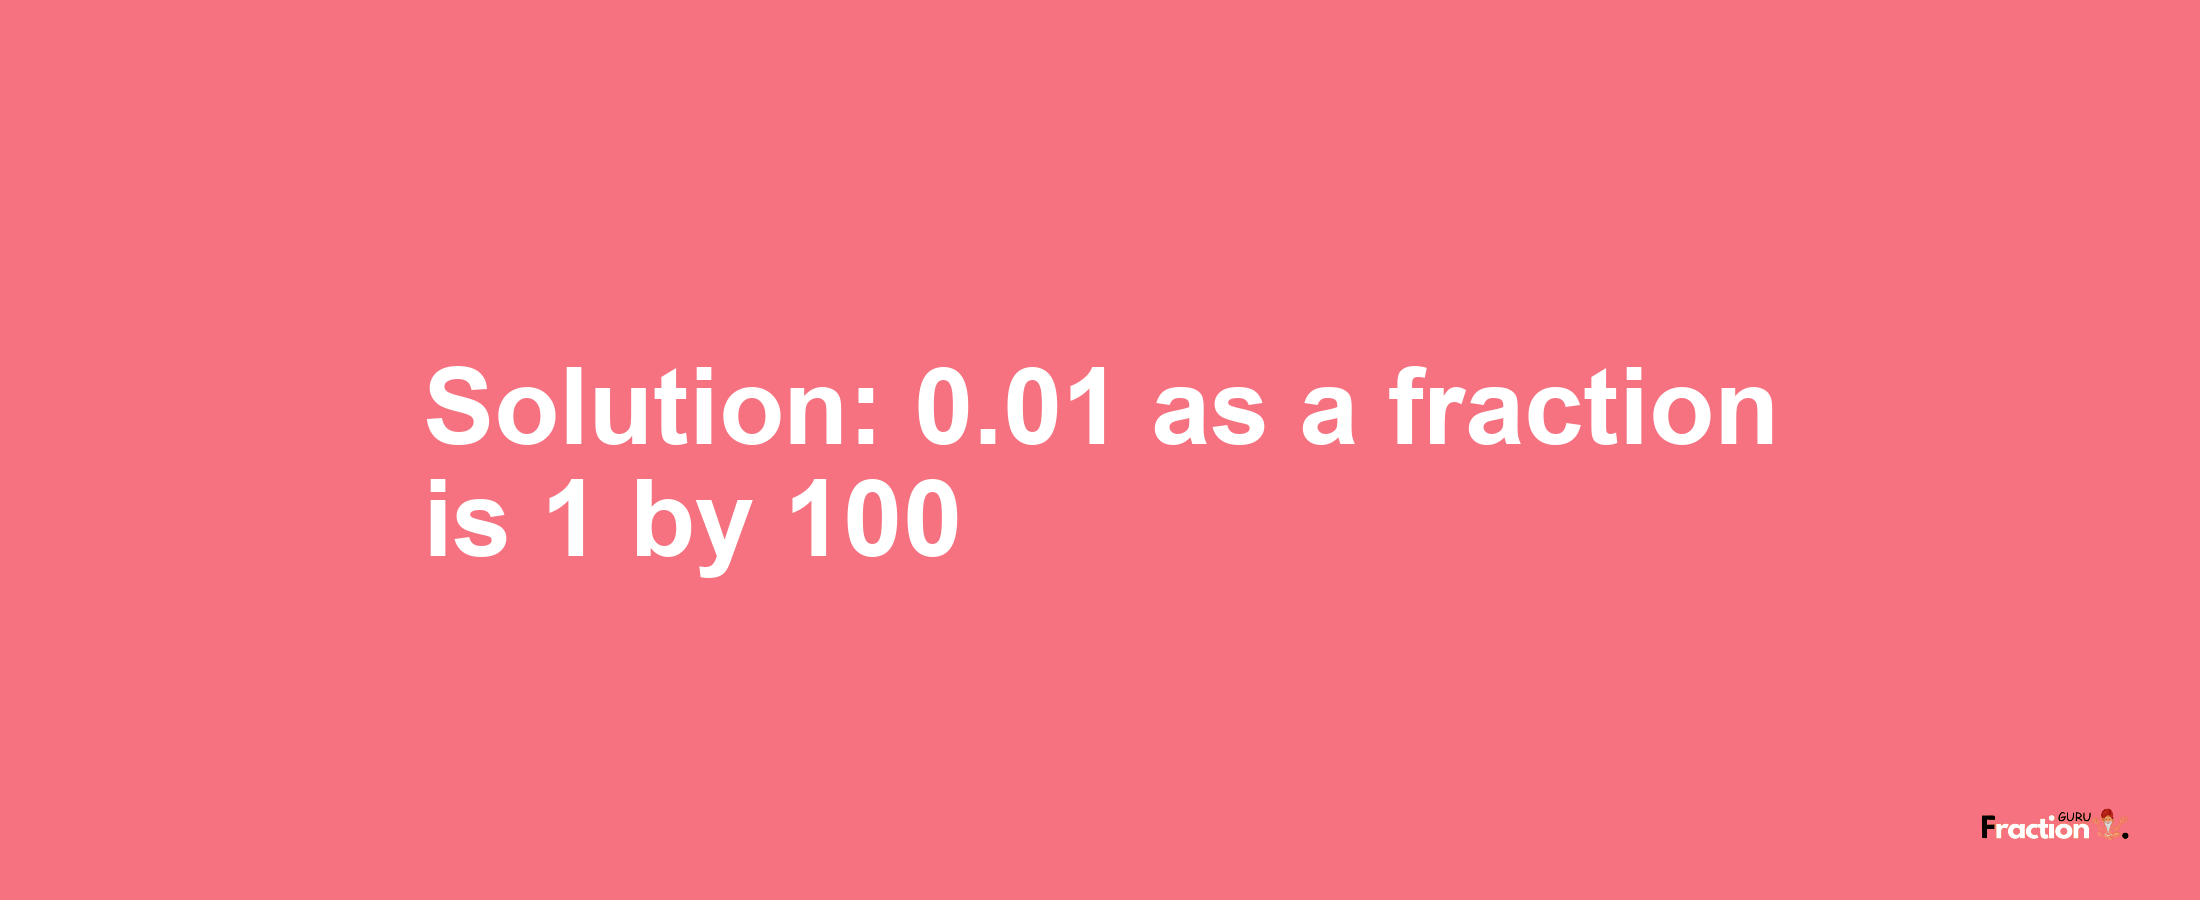 Solution:0.01 as a fraction is 1/100